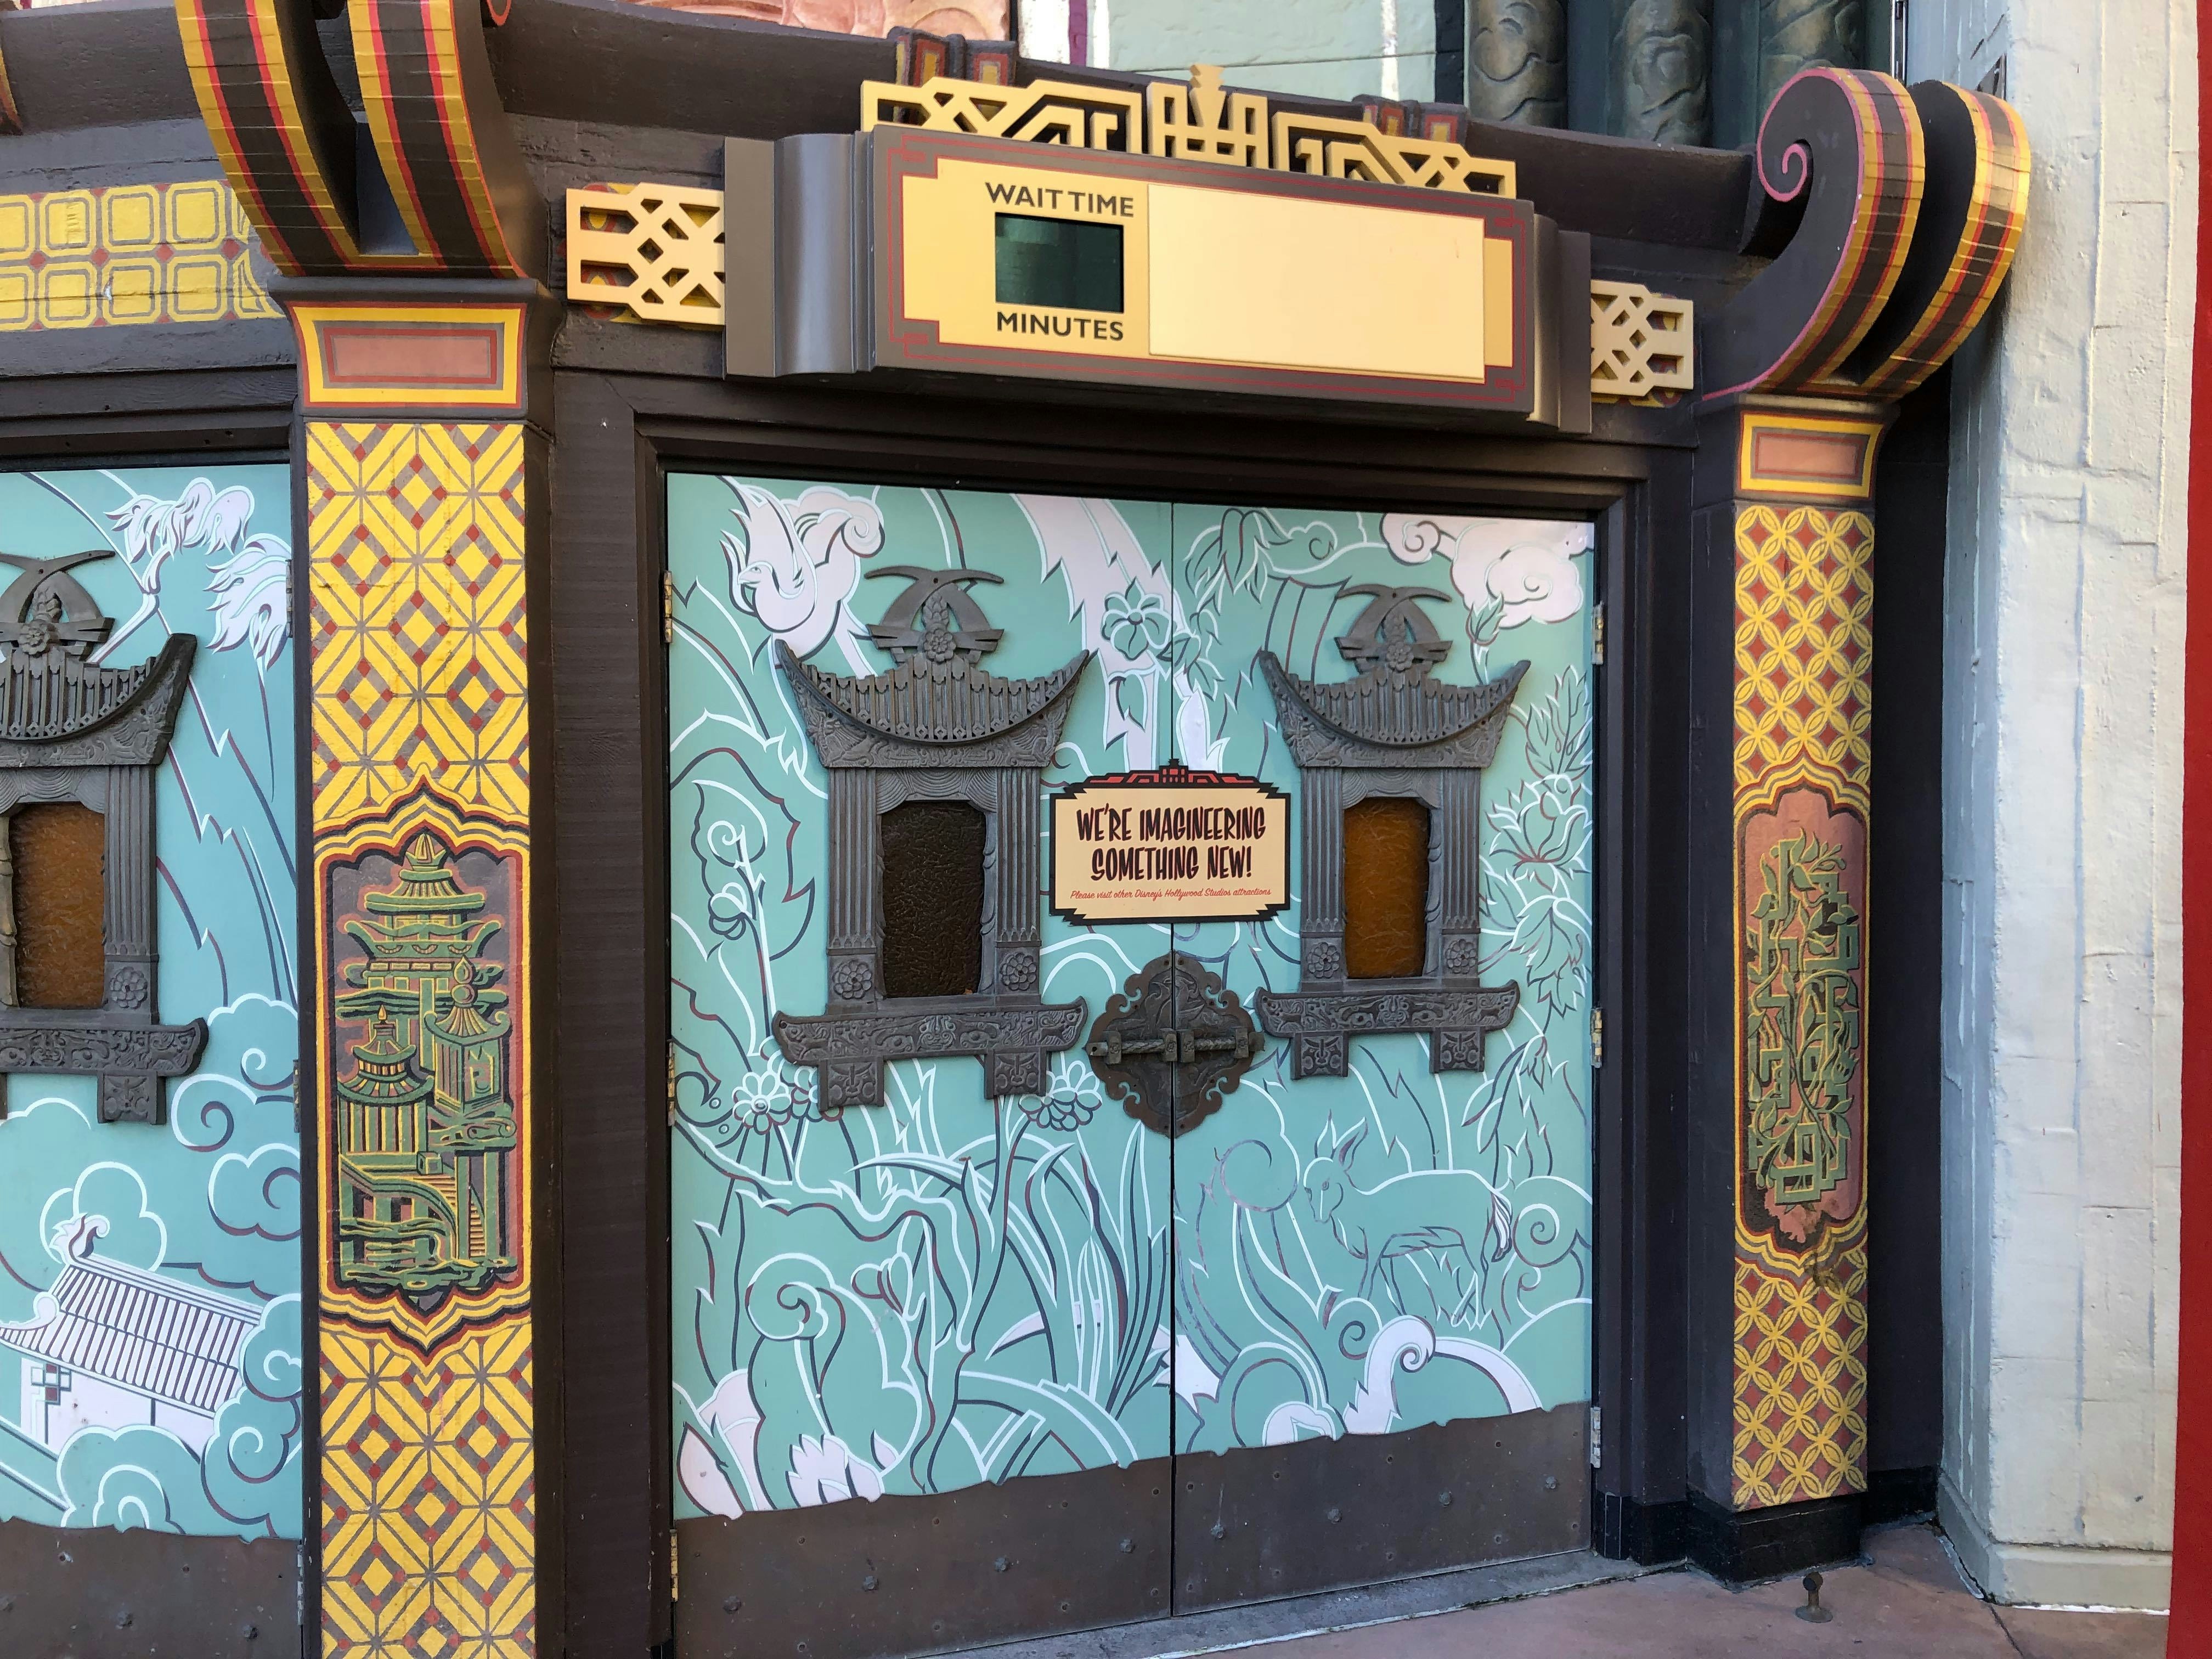 chinese theatre mickey and minnies runaway railway wait times and exit signs jan 2020 4.jpg?auto=compress%2Cformat&ixlib=php 1.2